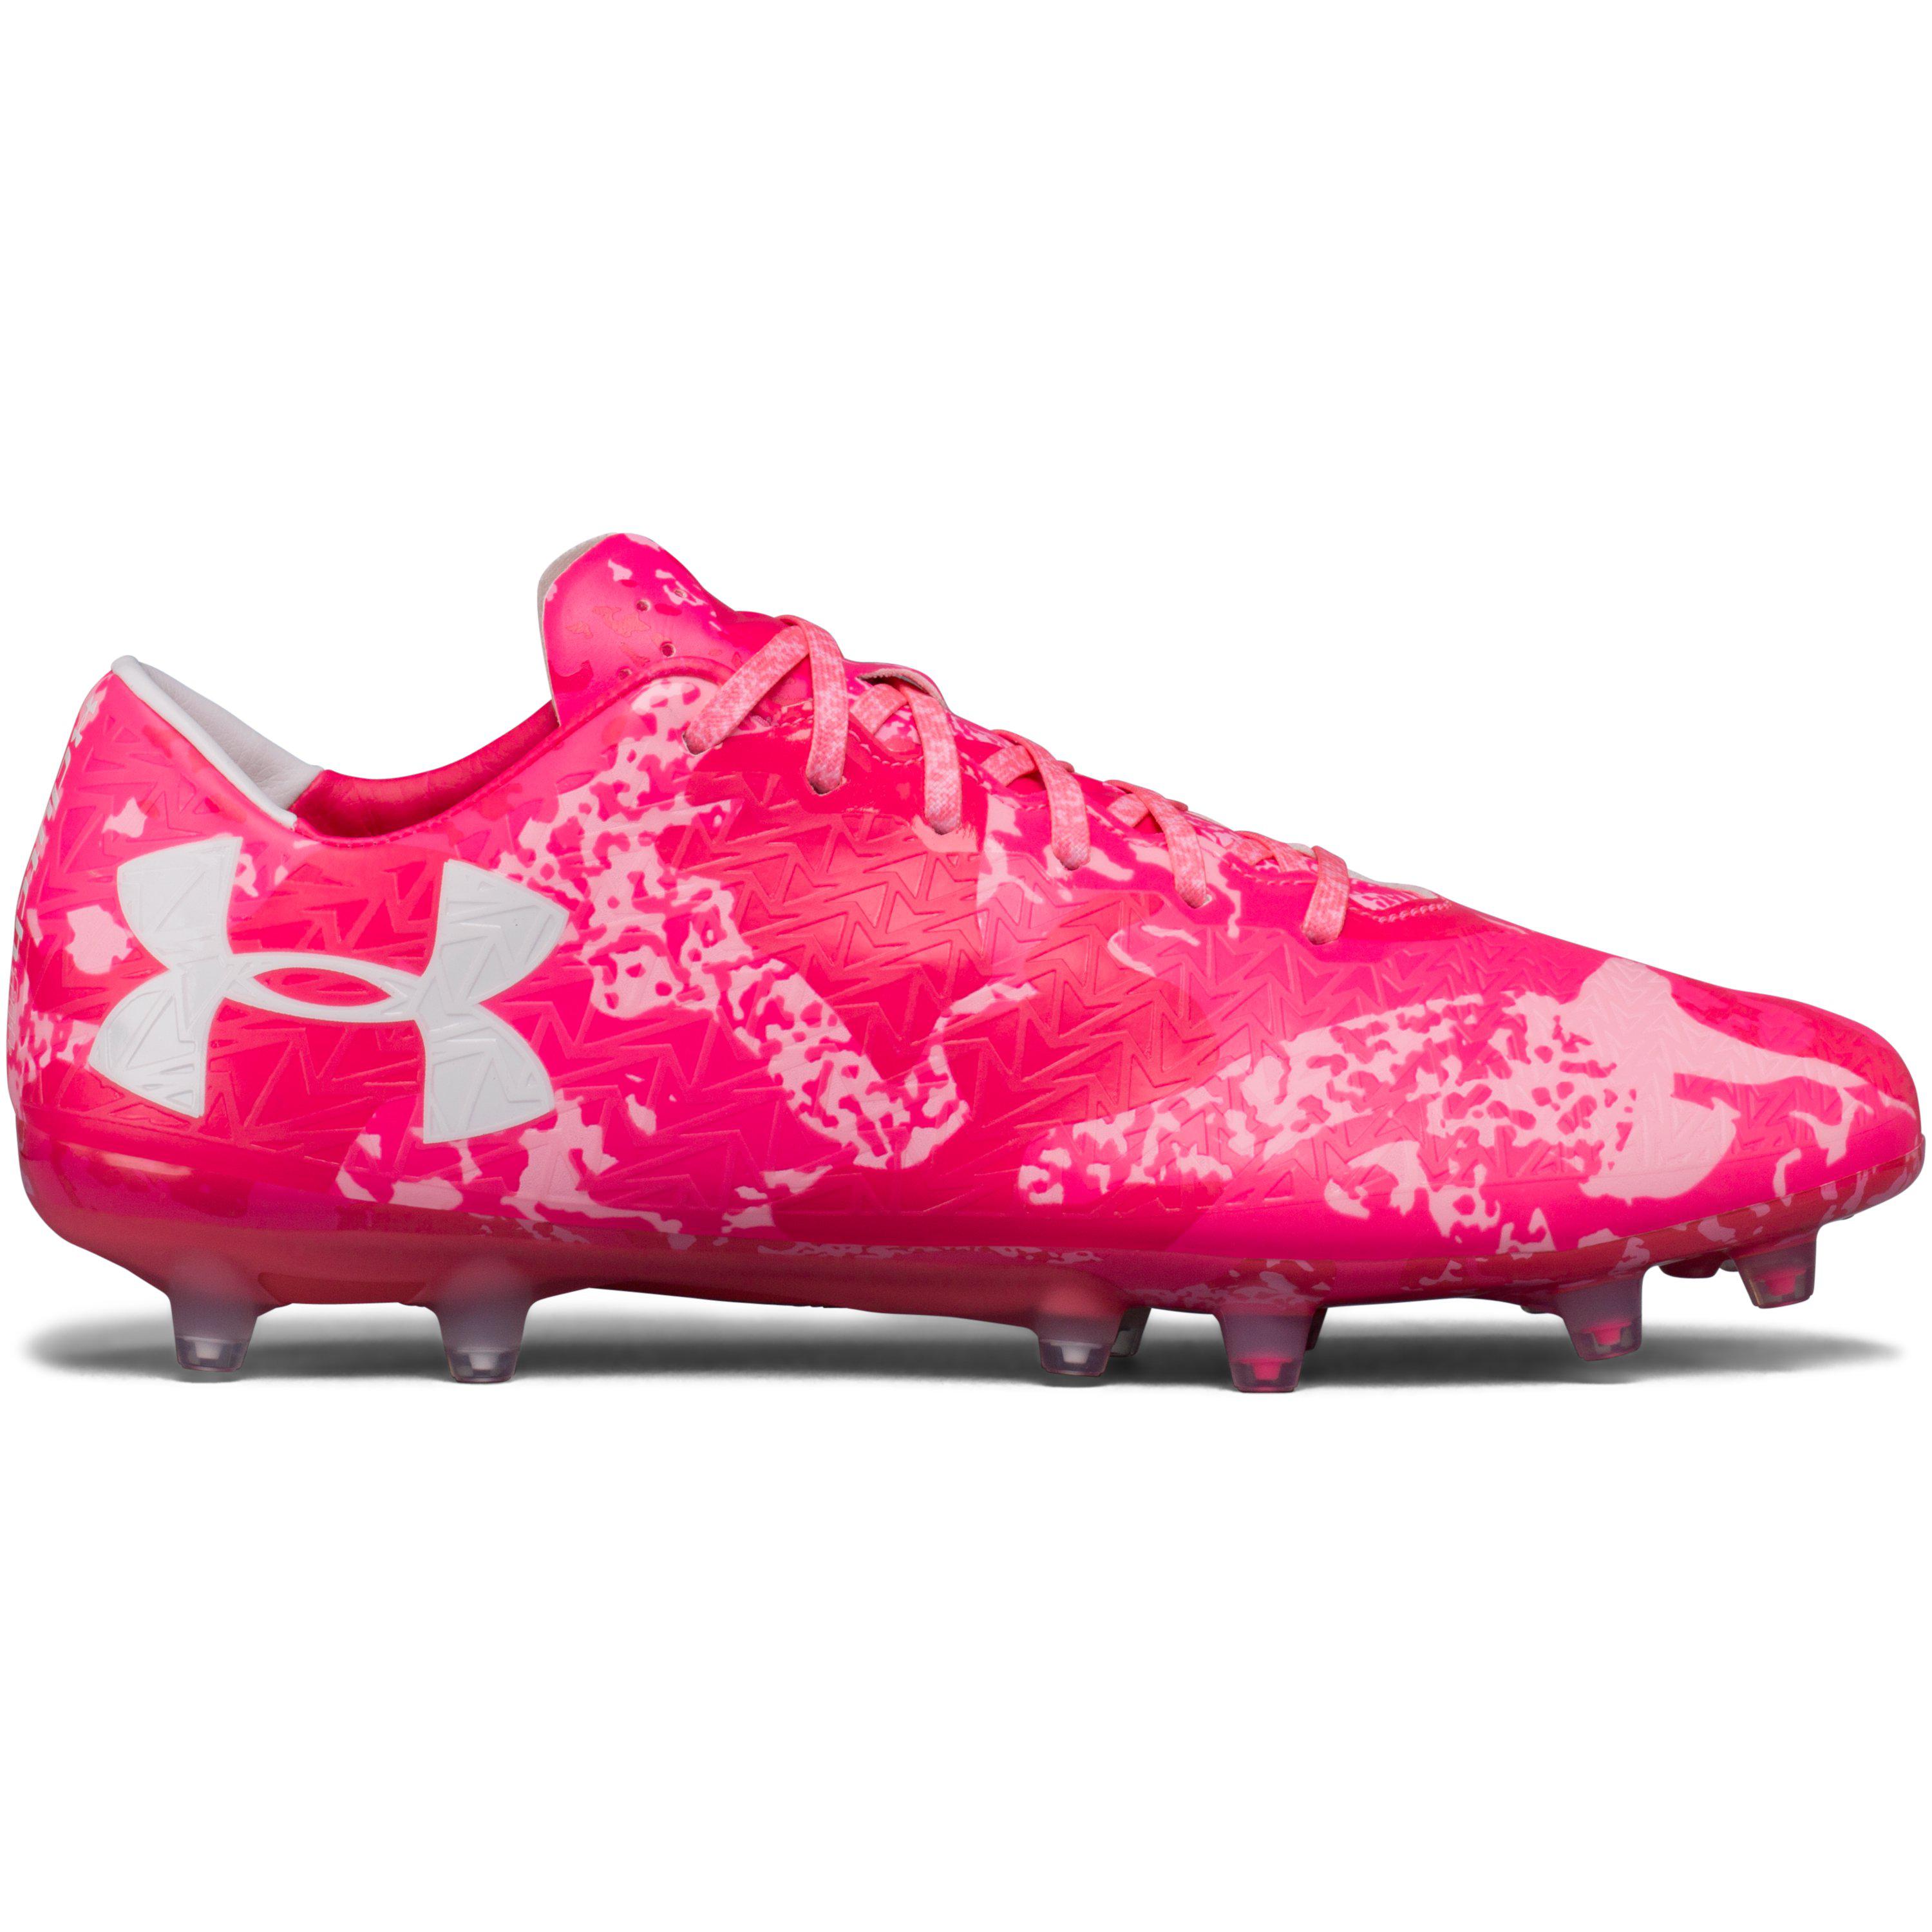 3.0 in Firm Force | Pink Lyst Men\'s Men Under Cleats for Clutchfit® Ua Armour Limited Ground— Soccer Edition